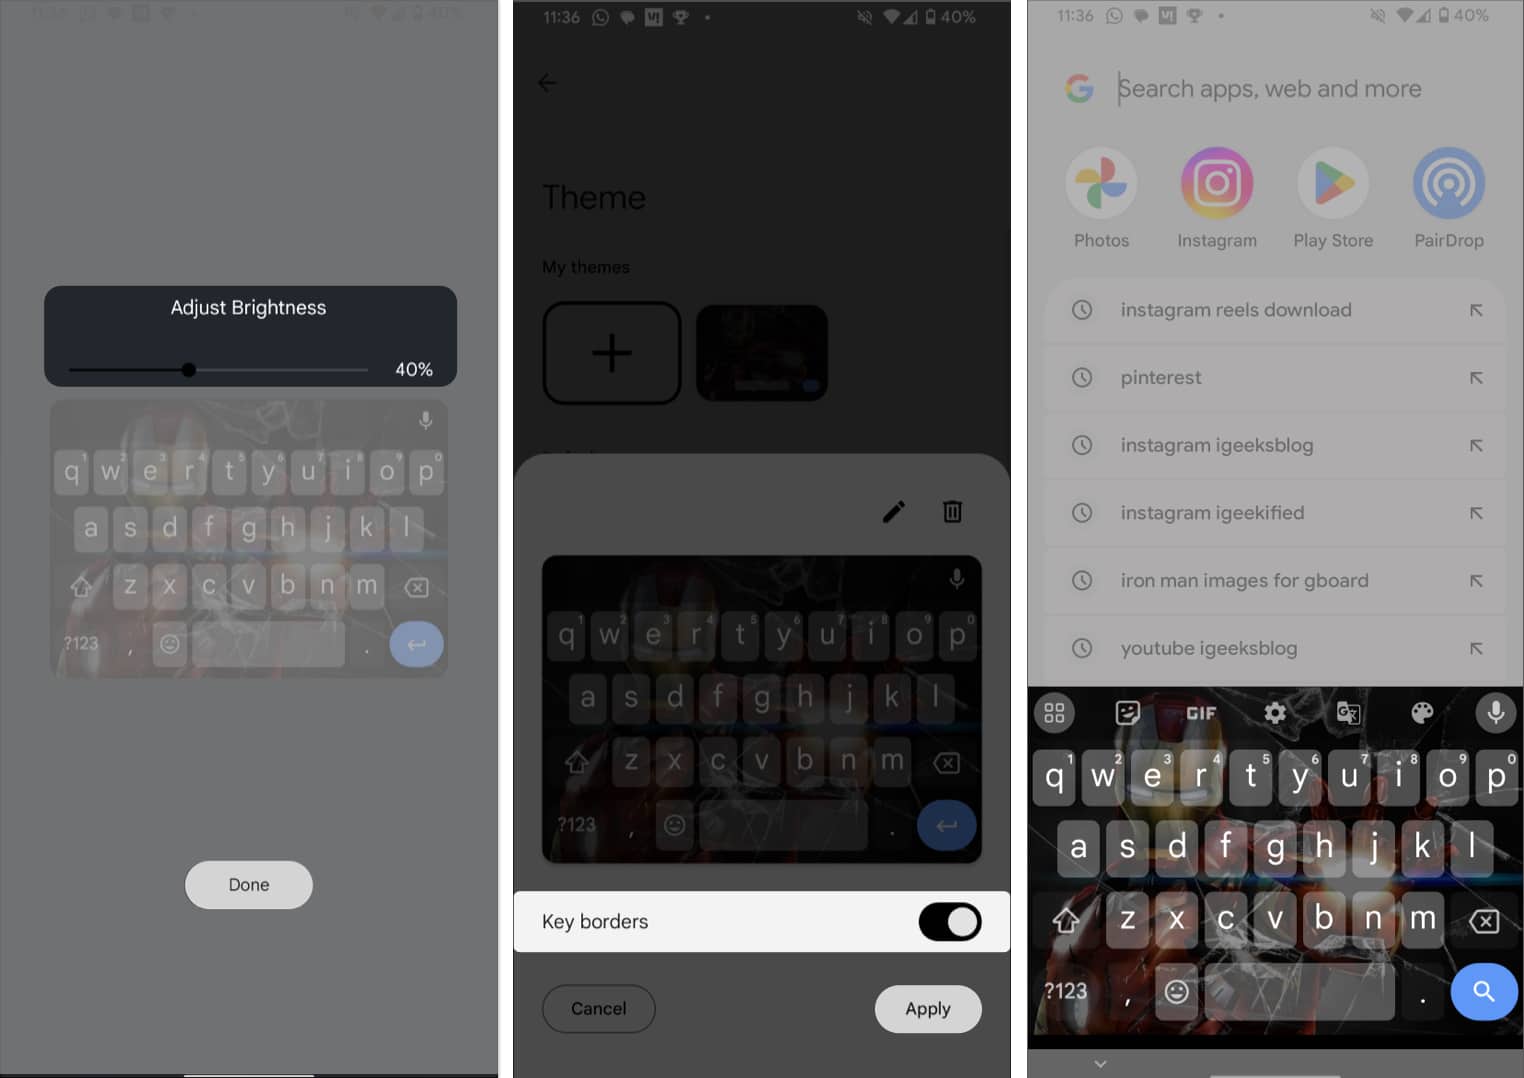 Adjust the brightness of theme in Gboard